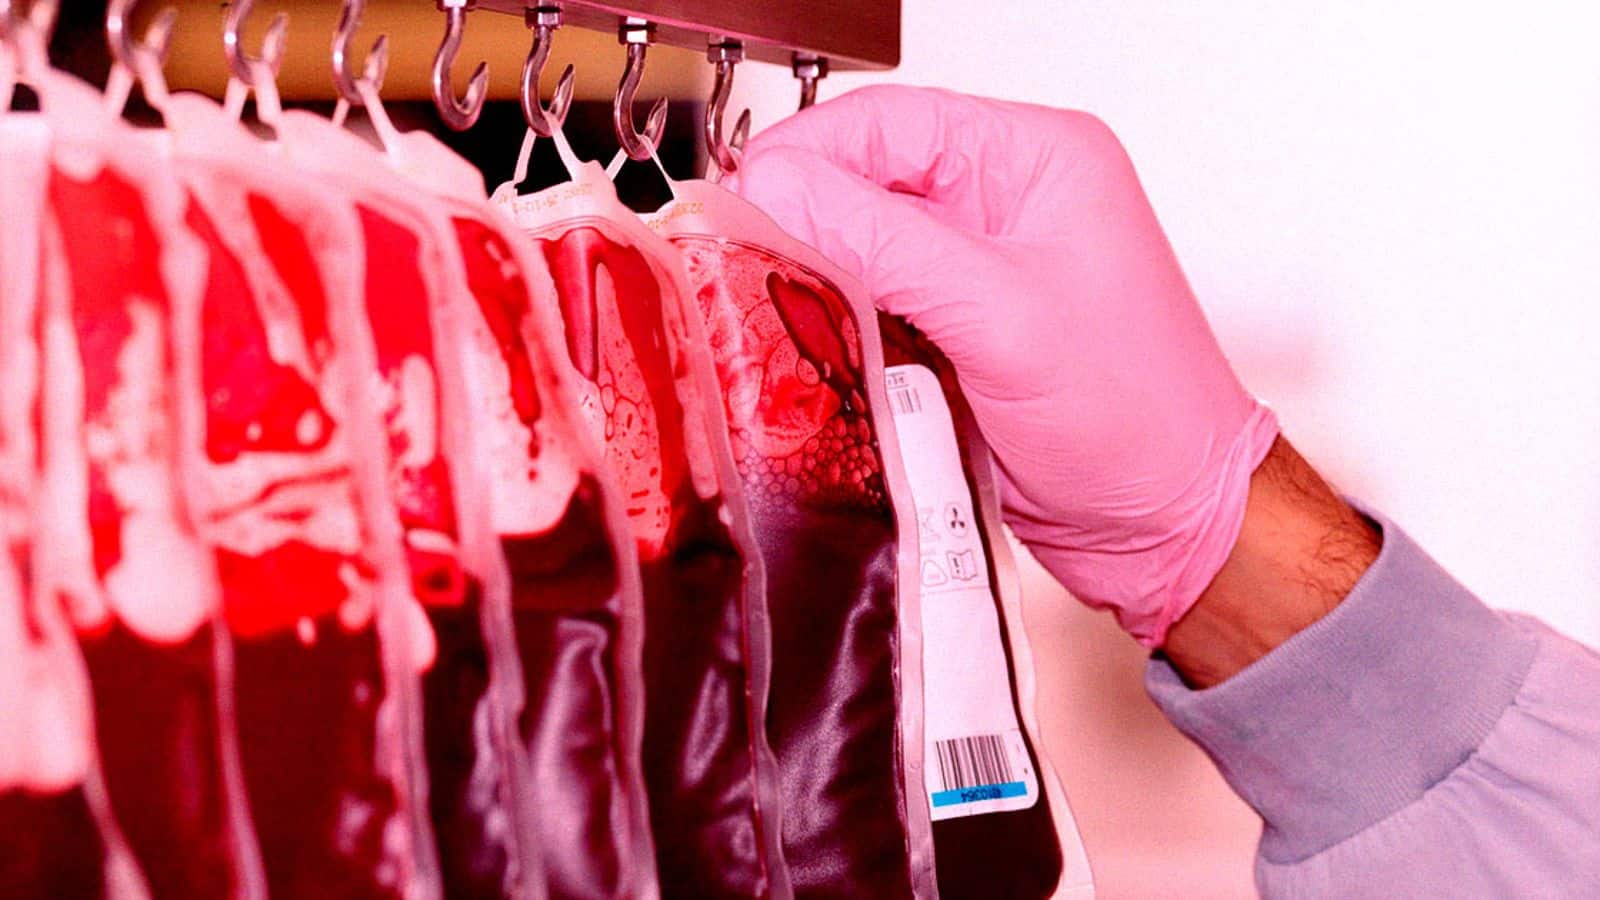 Revolutionary discovery! Bacteria converts blood to universal donor type